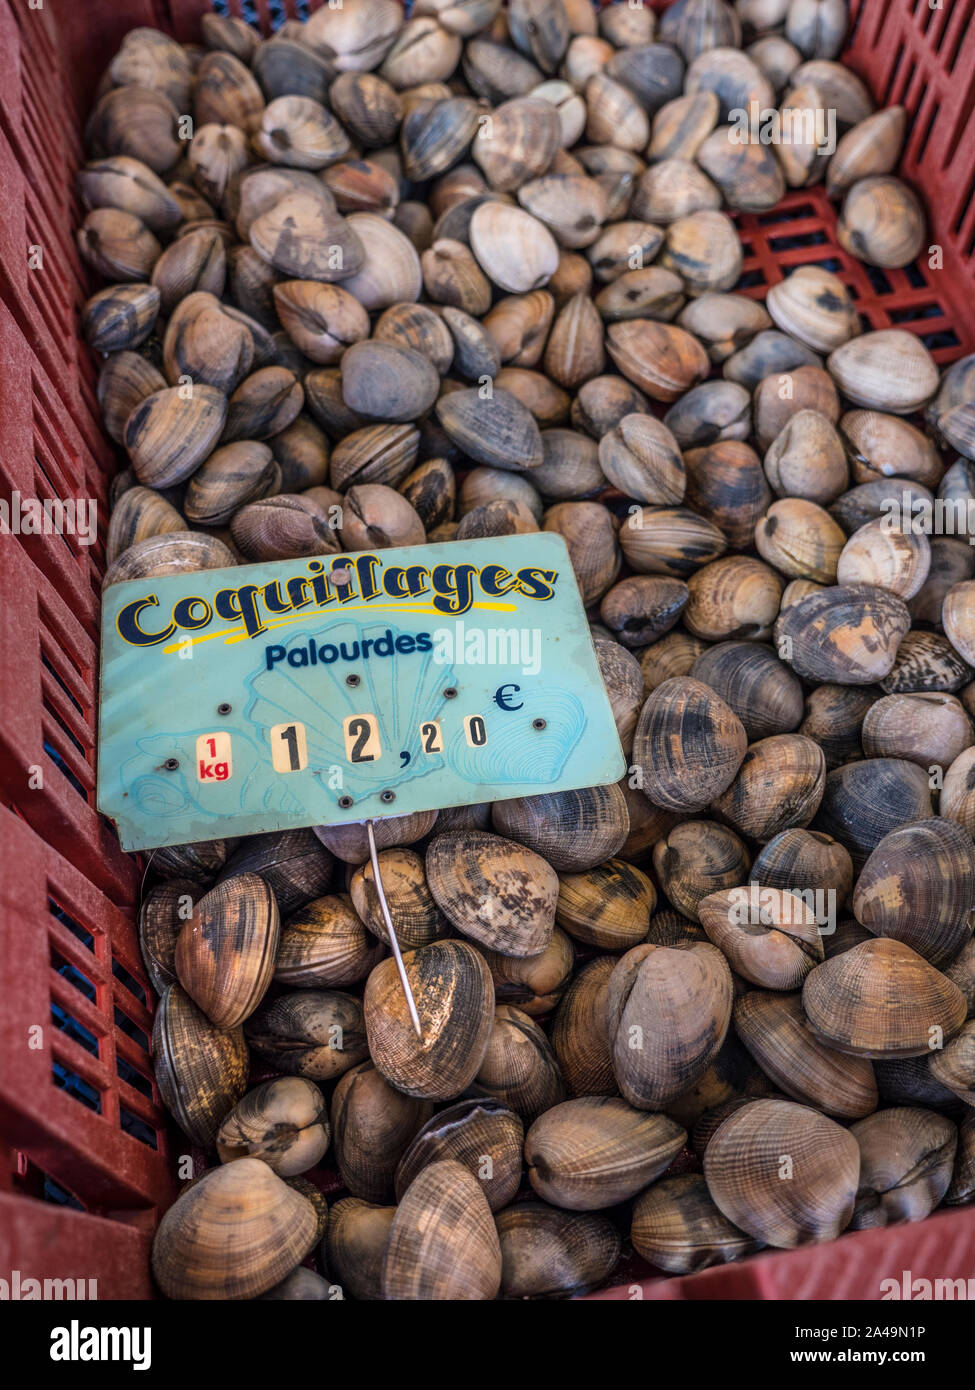 Mercato del pesce in Francia COQUILLAGES VONGOLE VONGOLE; CONCARNEAU  mercato coperto del pesce COQUILLAGE vongole in